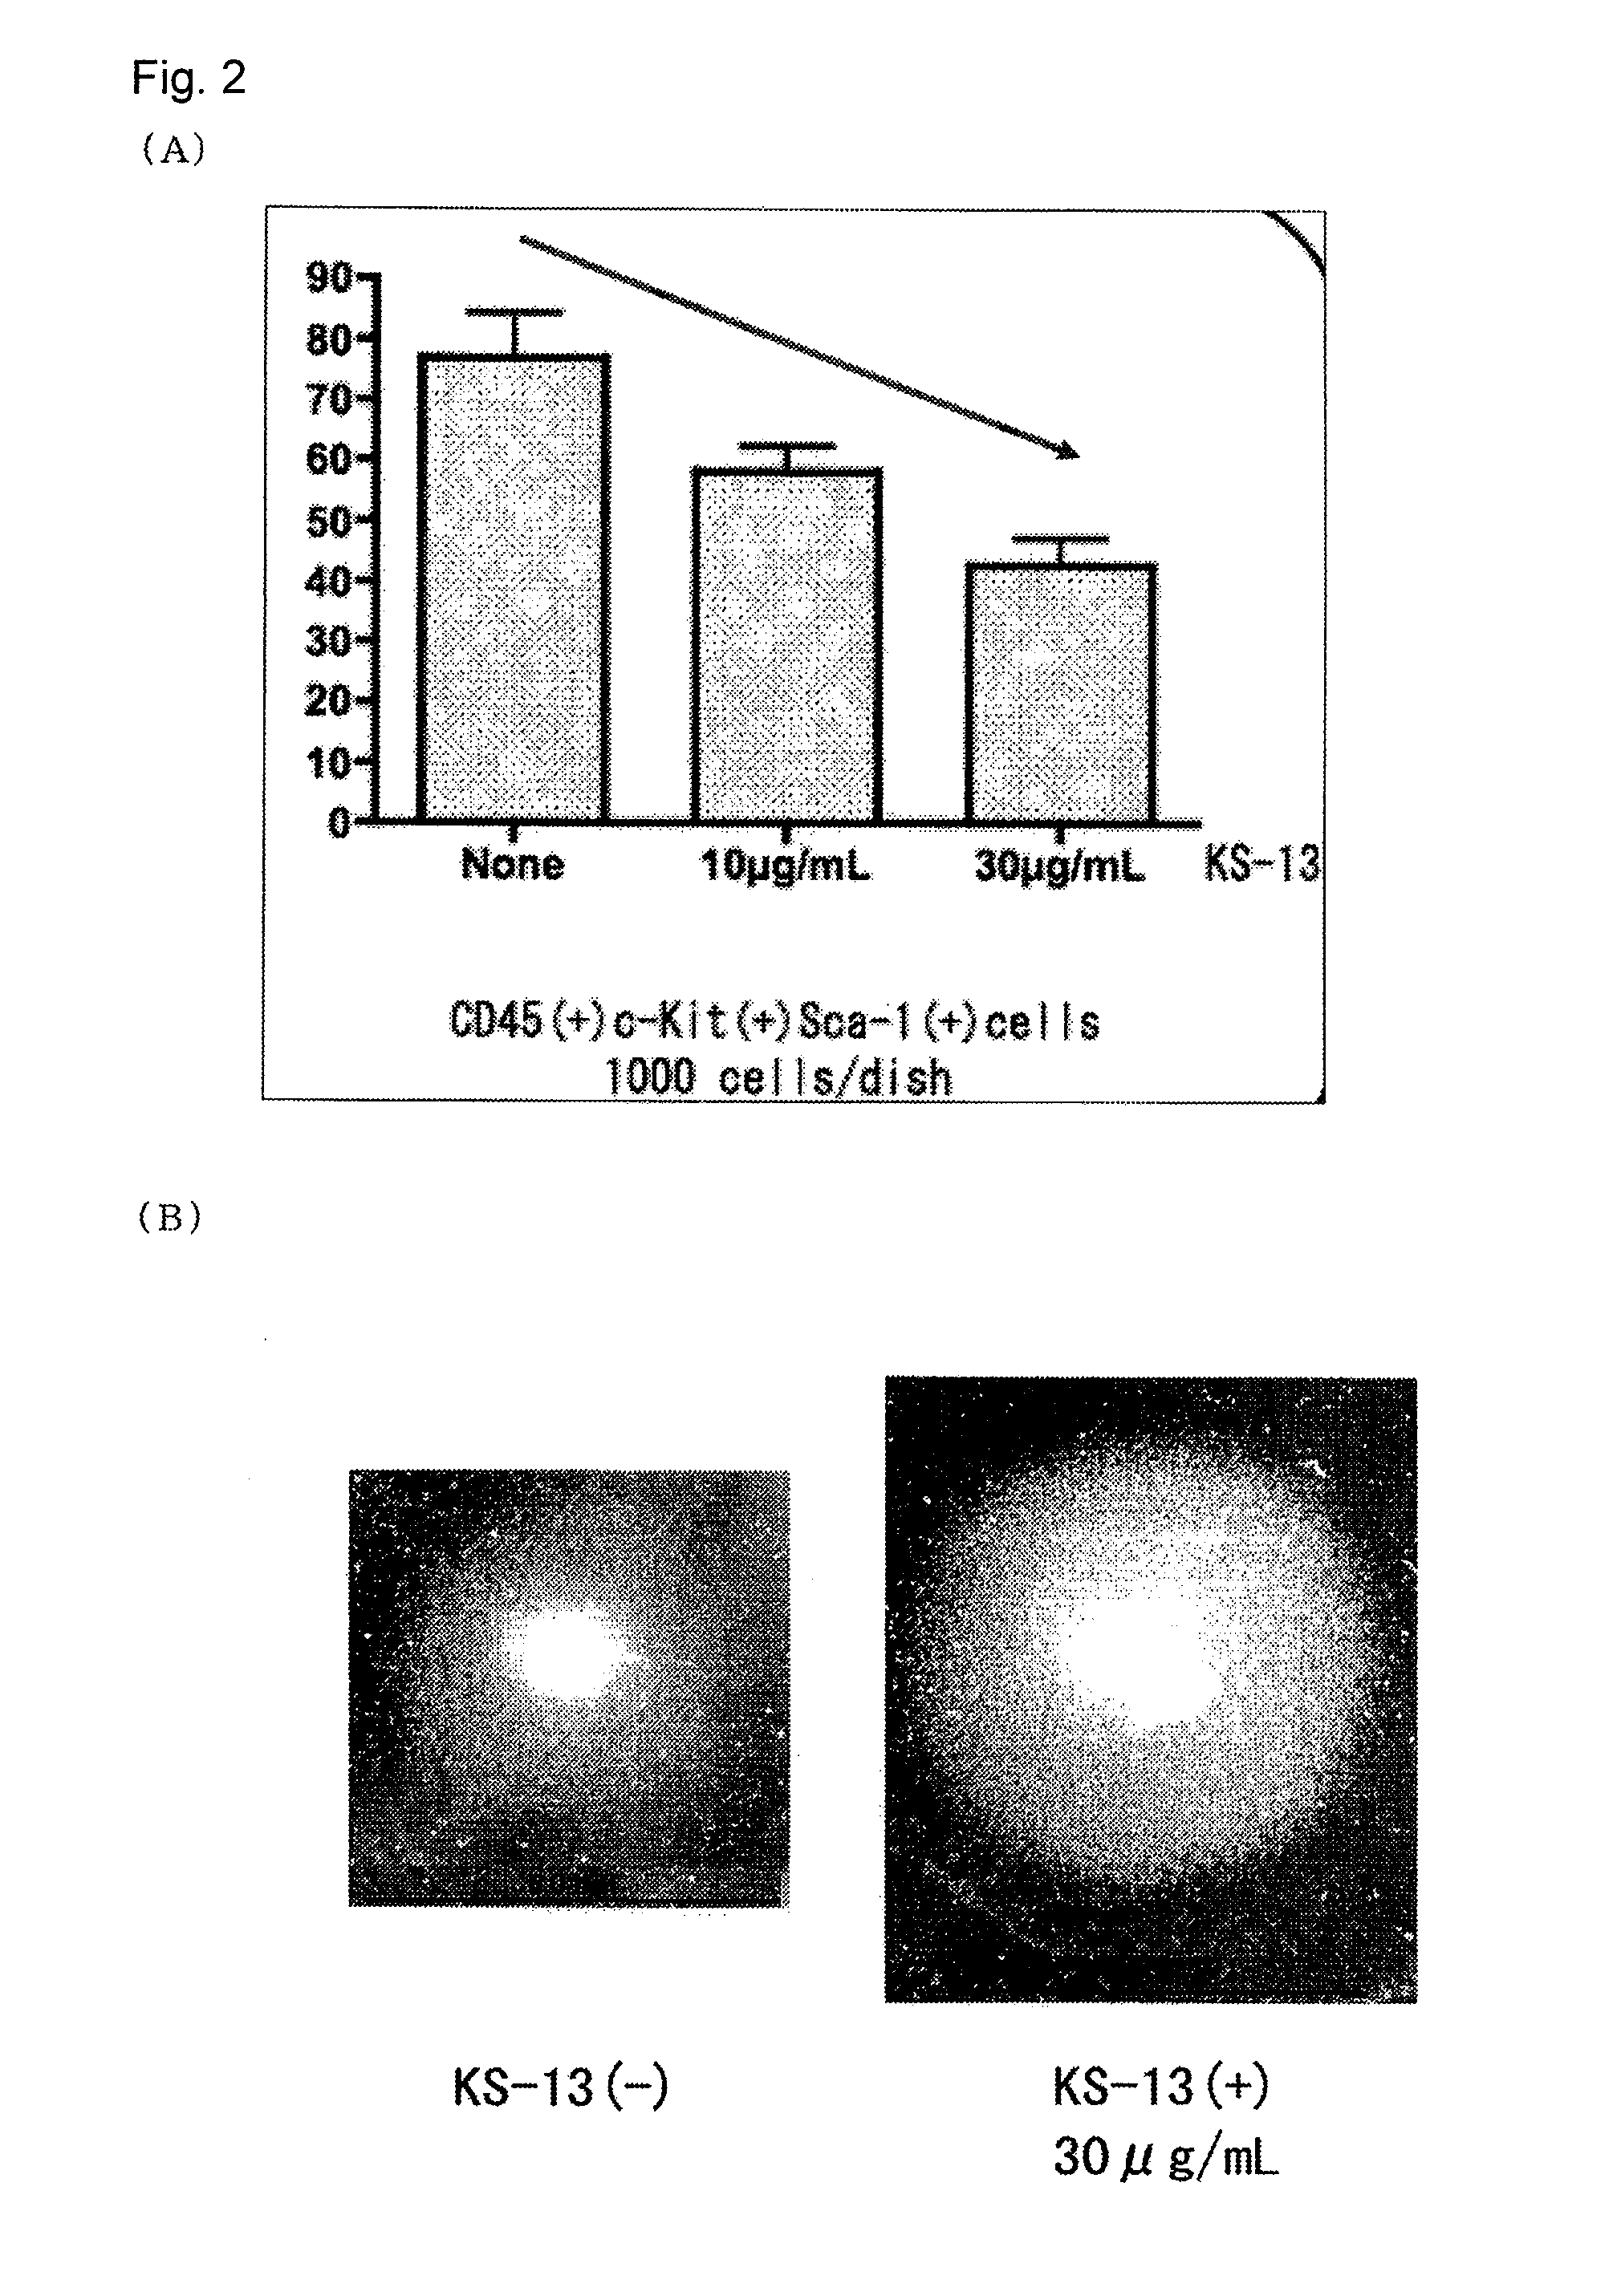 Peptide inhibiting differentiation of hematopoietic stem cells or hematopoietic precursor cells and use of same